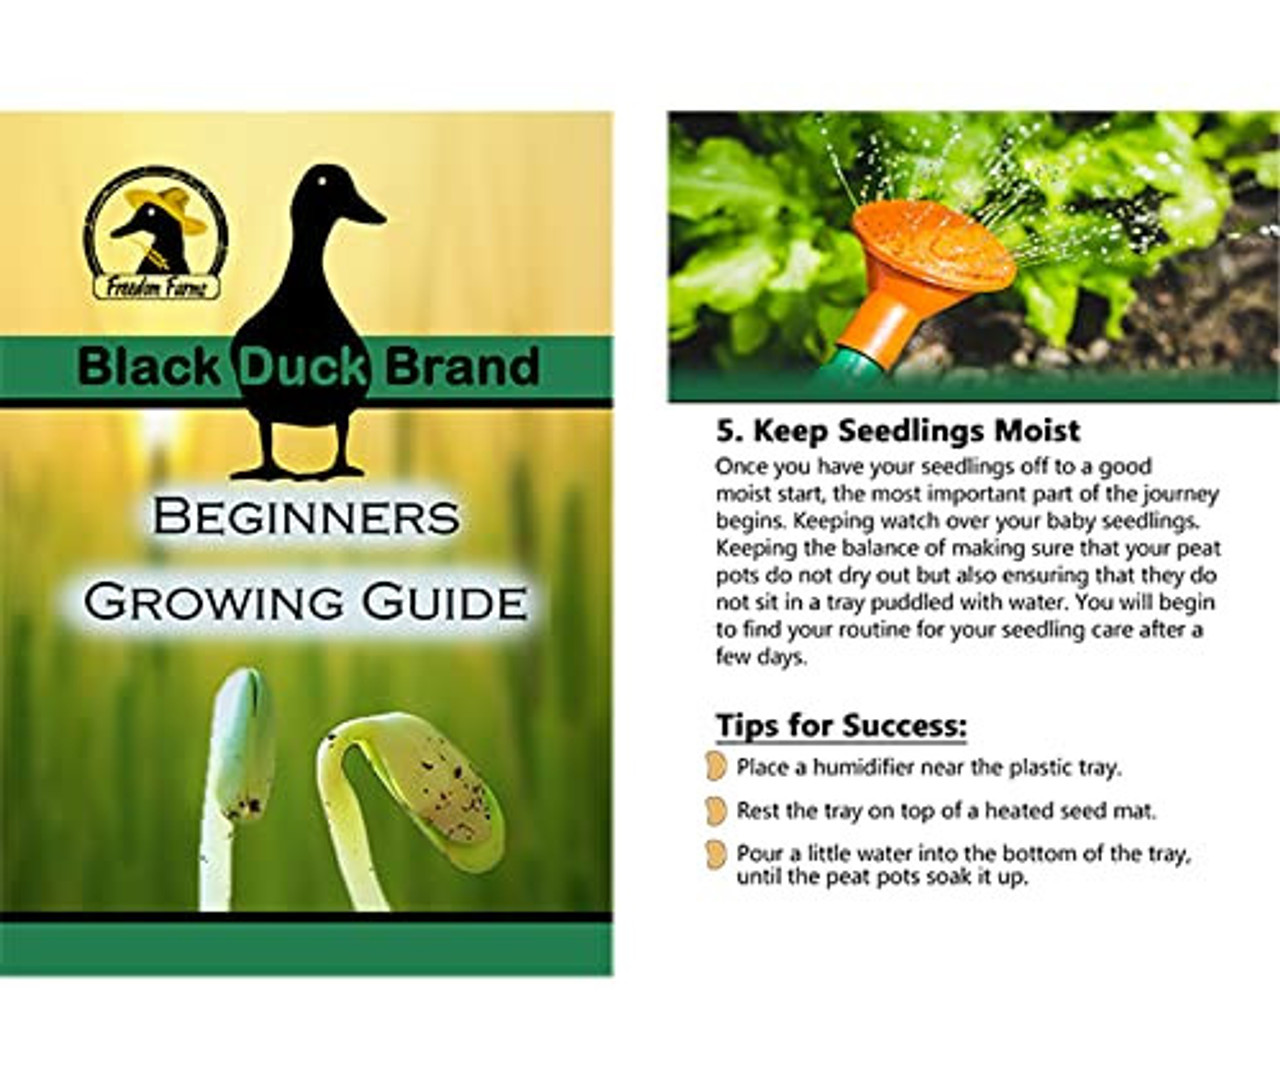 The 4 Best Seed Starter Kits